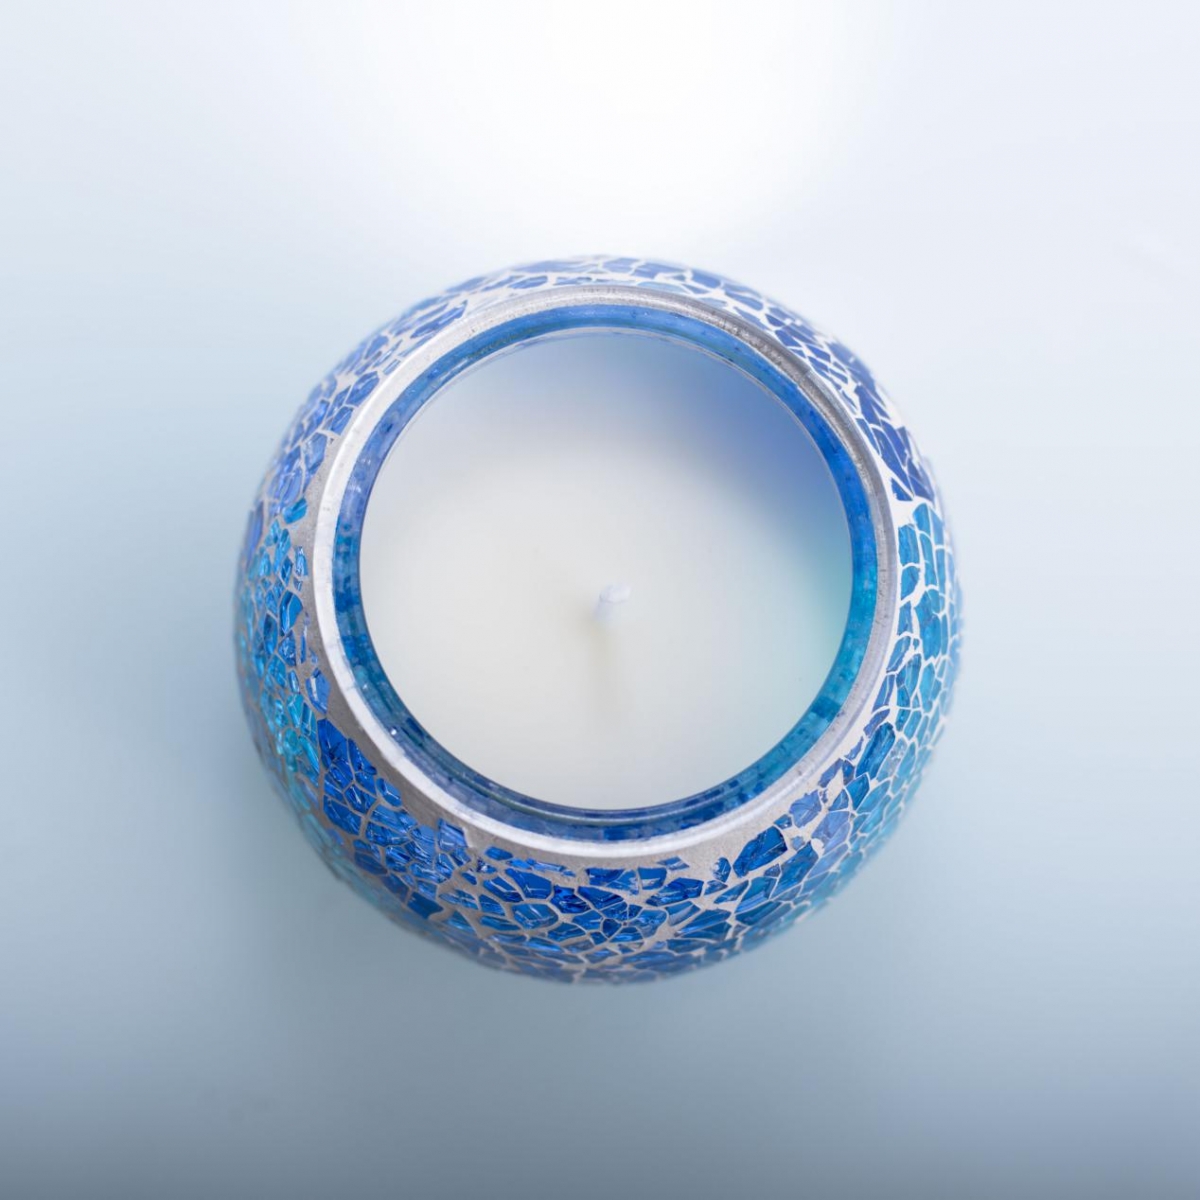 Scented Candles -Blue Colored Mosaic Glass Jar , Cedar Wood & Lavender ,Soy Candles ,China Factory ,Price-HOWCANDLE-Candles,Scented Candles,Aromatherapy Candles,Soy Candles,Vegan Candles,Jar Candles,Pillar Candles,Candle Gift Sets,Essential Oils,Reed Diffuser,Candle Holder,